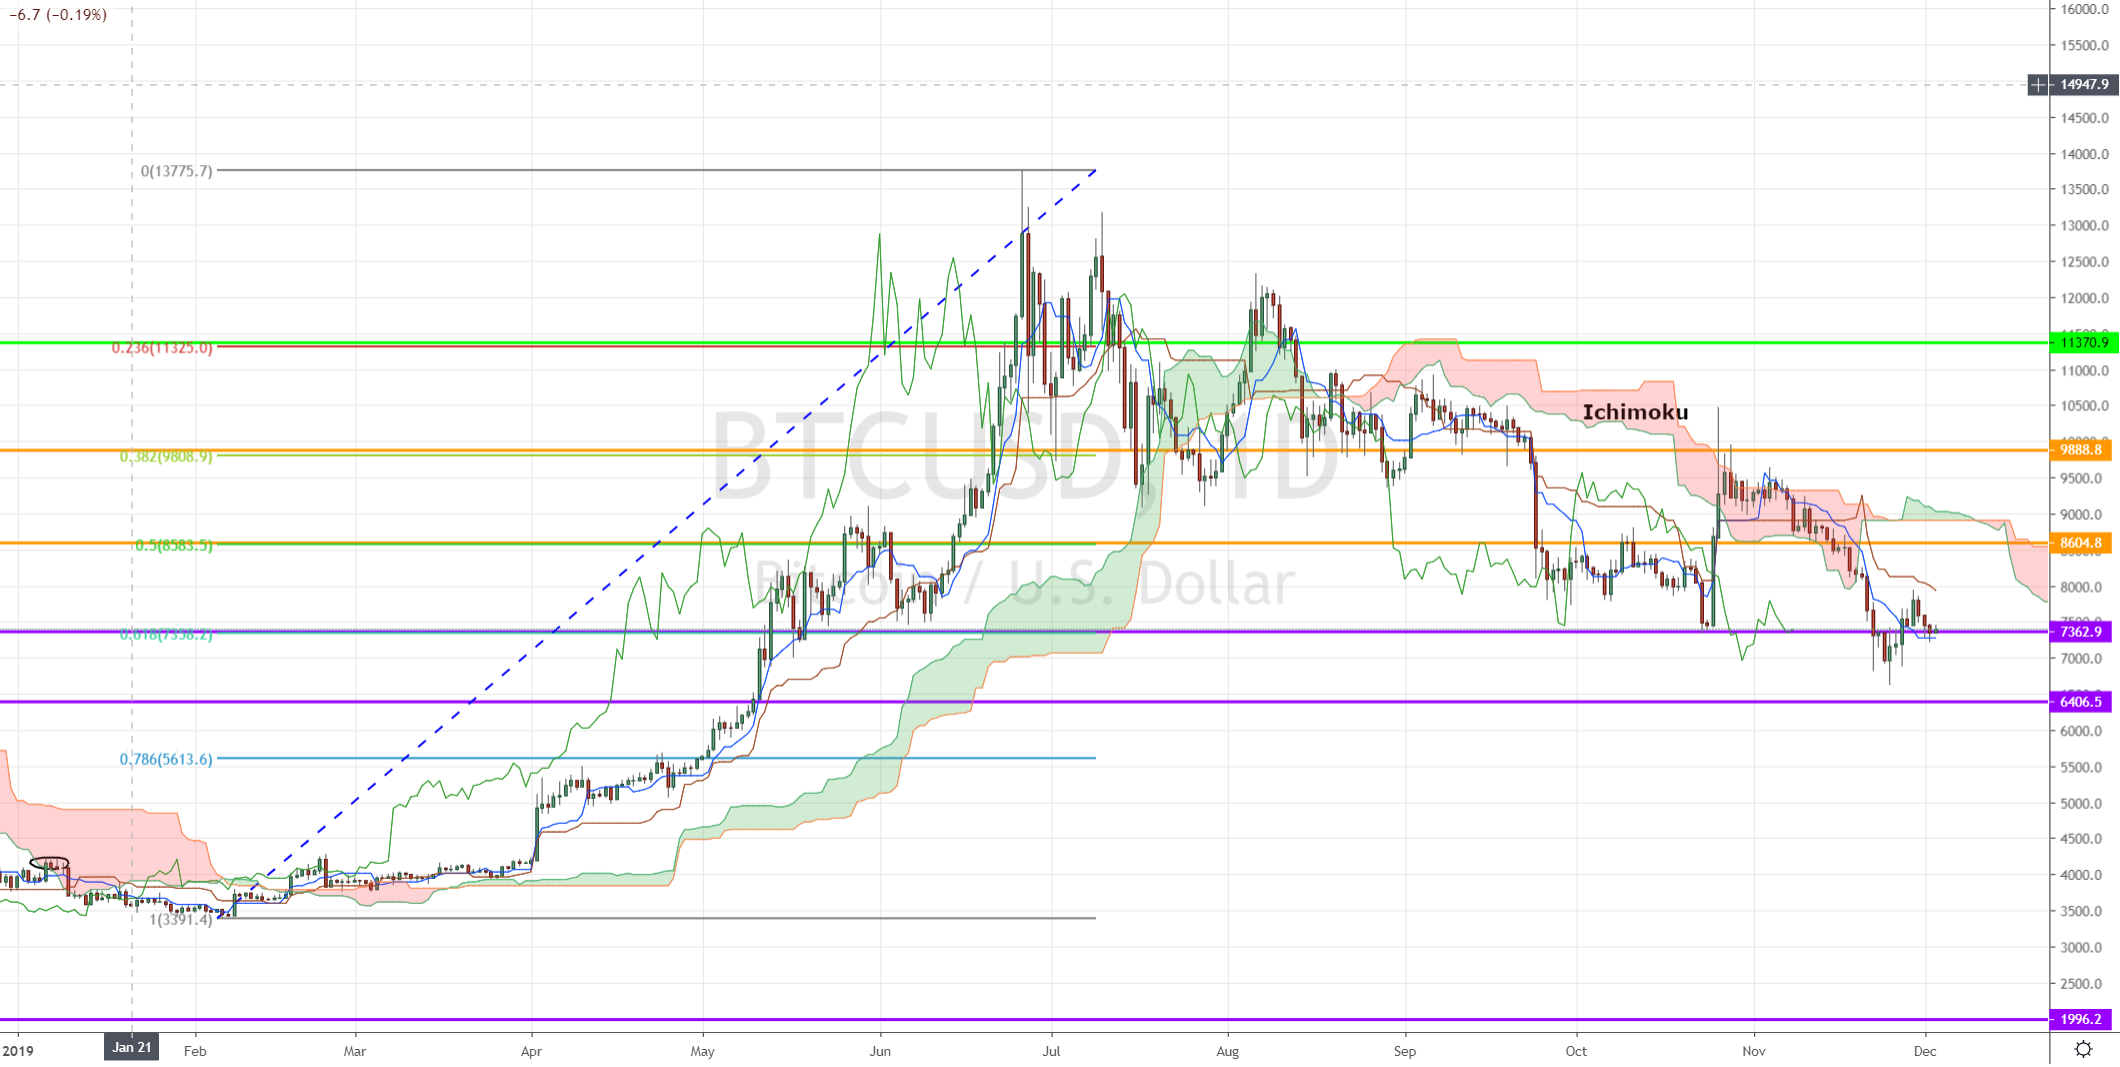 How to Use the Ichimoku Cloud Trading Strategy | TabTrader